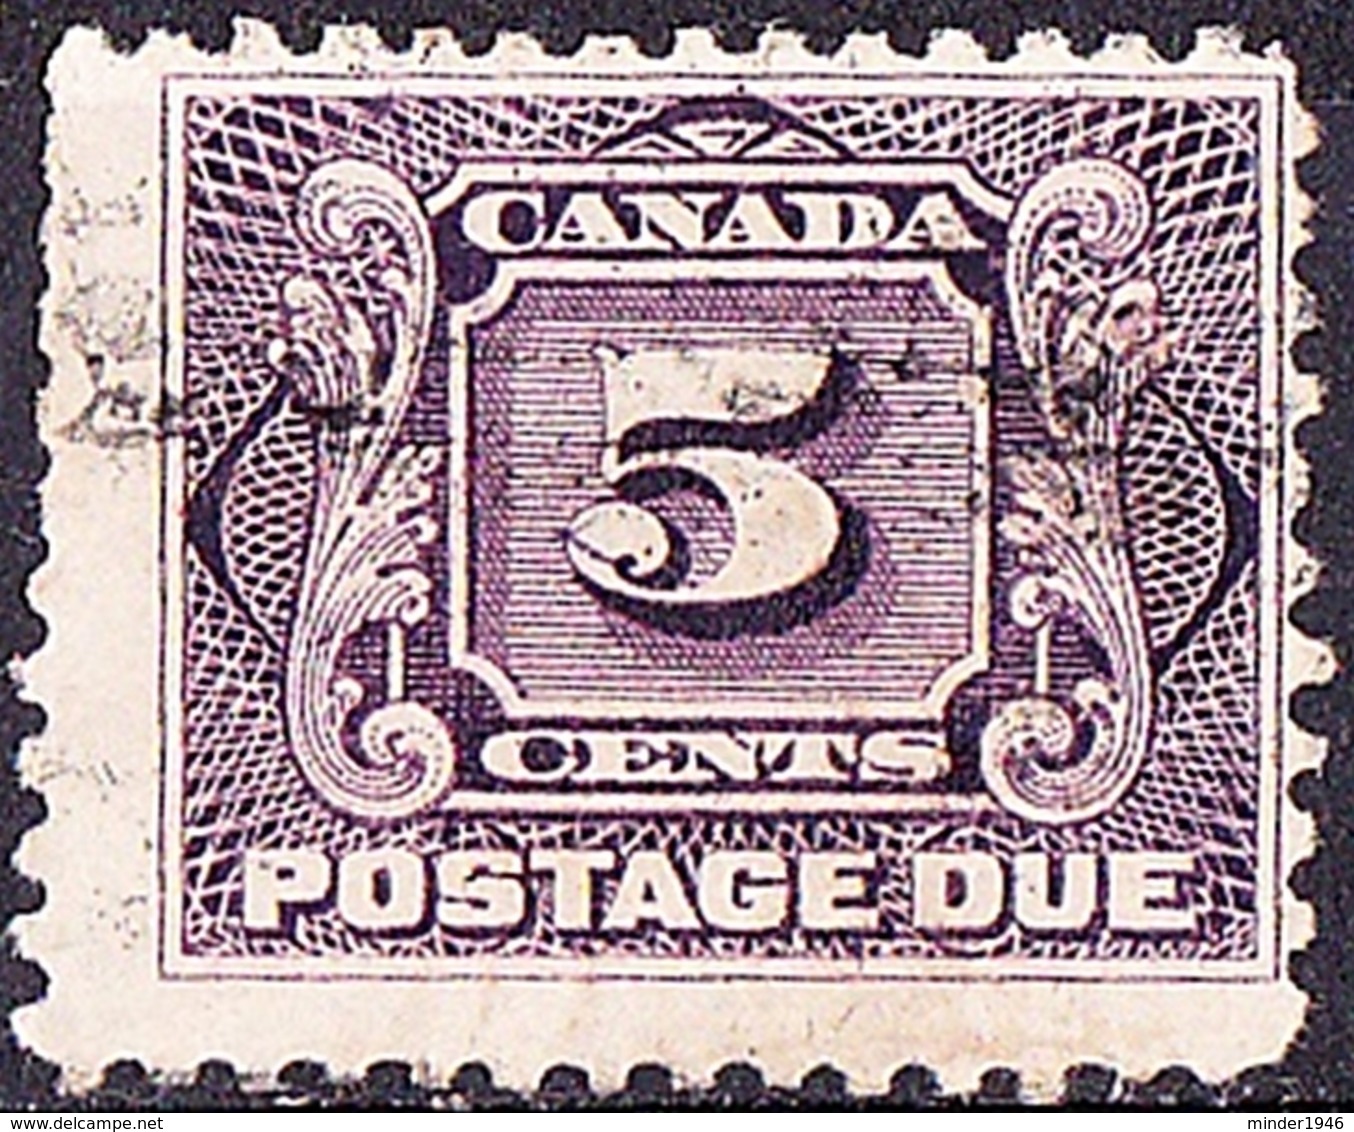 CANADA 1924 KGV 5c Postage Due Red Violet Thin Paper SGD7a Used - Postage Due